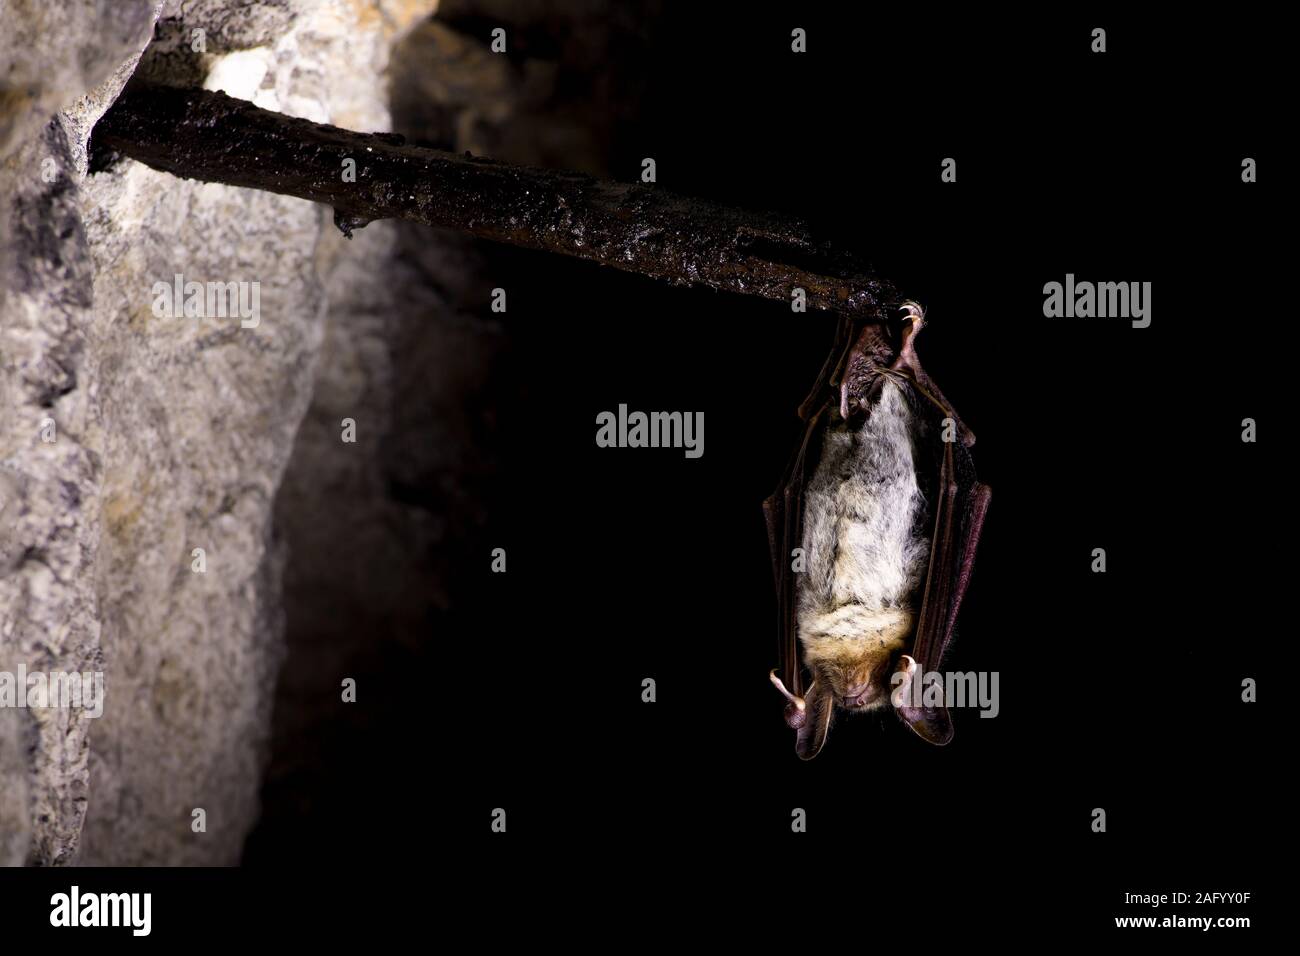 Close up strange animal Greater mouse-eared bat Myotis myotis hanging upside down on old wooden stick in stole. Wildlife photography in distinctive da Stock Photo